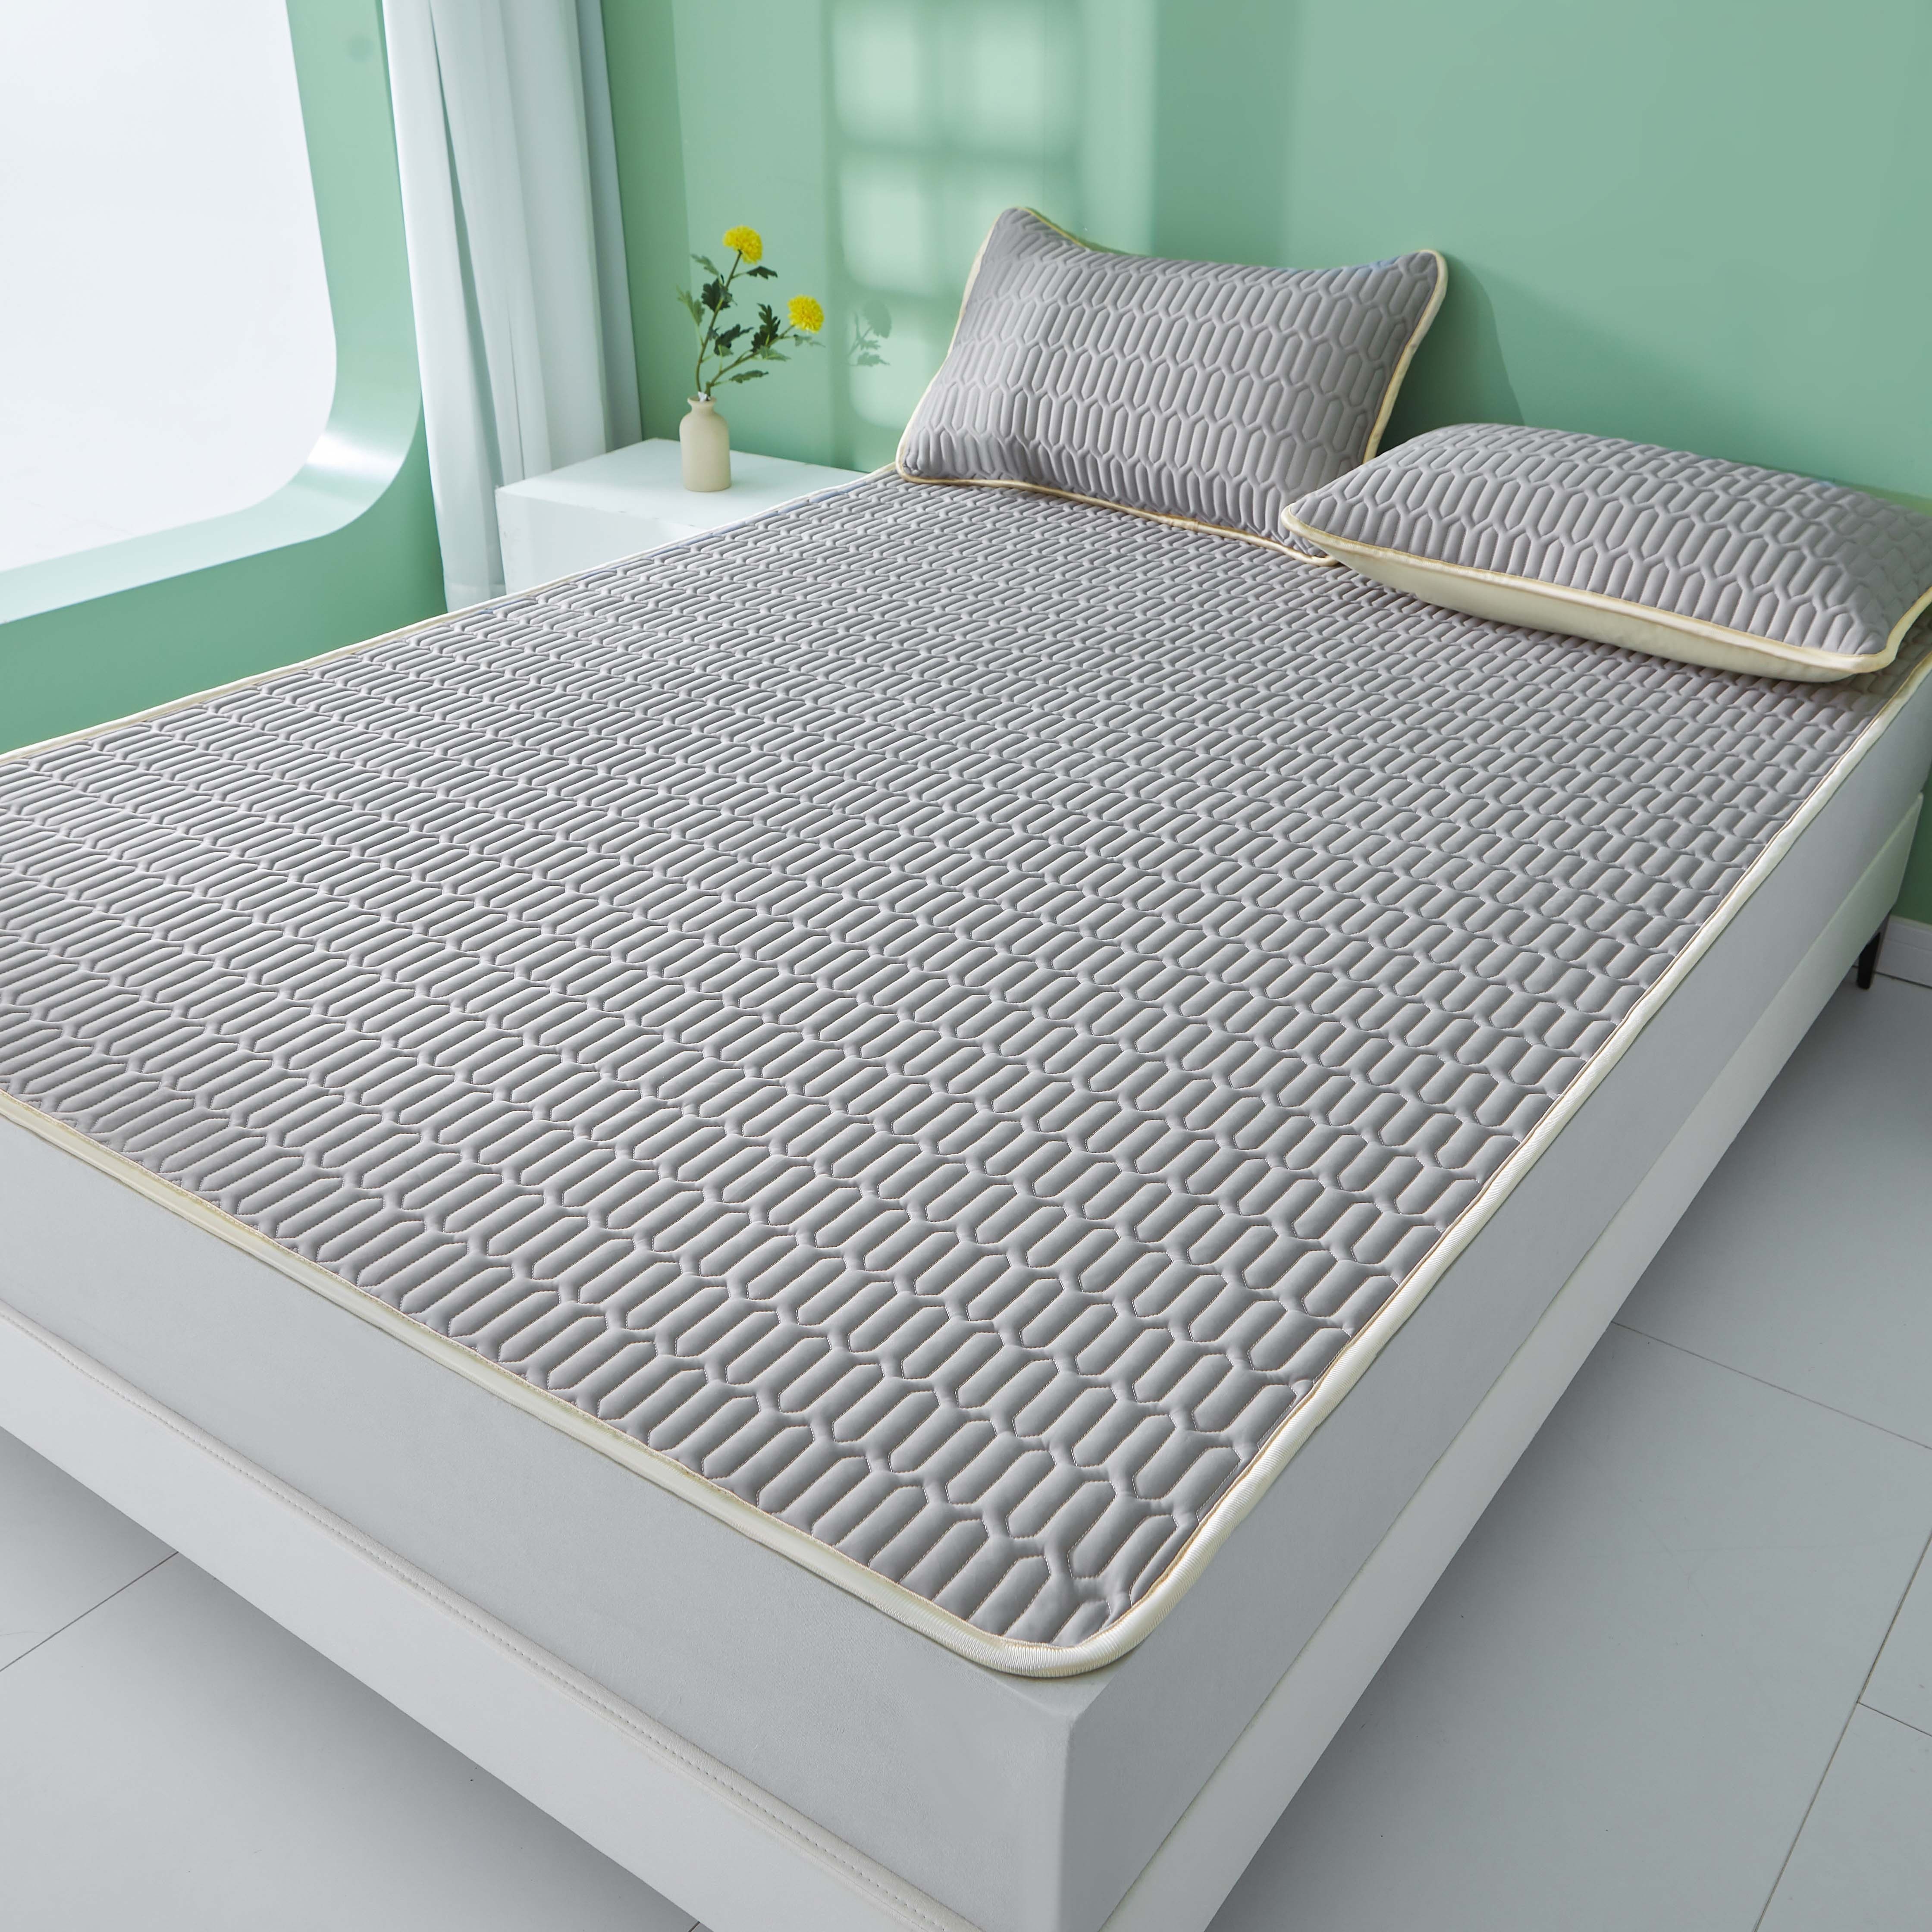 

chill Breeze" Cooling Latex Mat - 1pc, Solid Color, Skin-friendly & Breathable, Machine Washable For Summer Comfort, Perfect For Bedroom Or Dorm